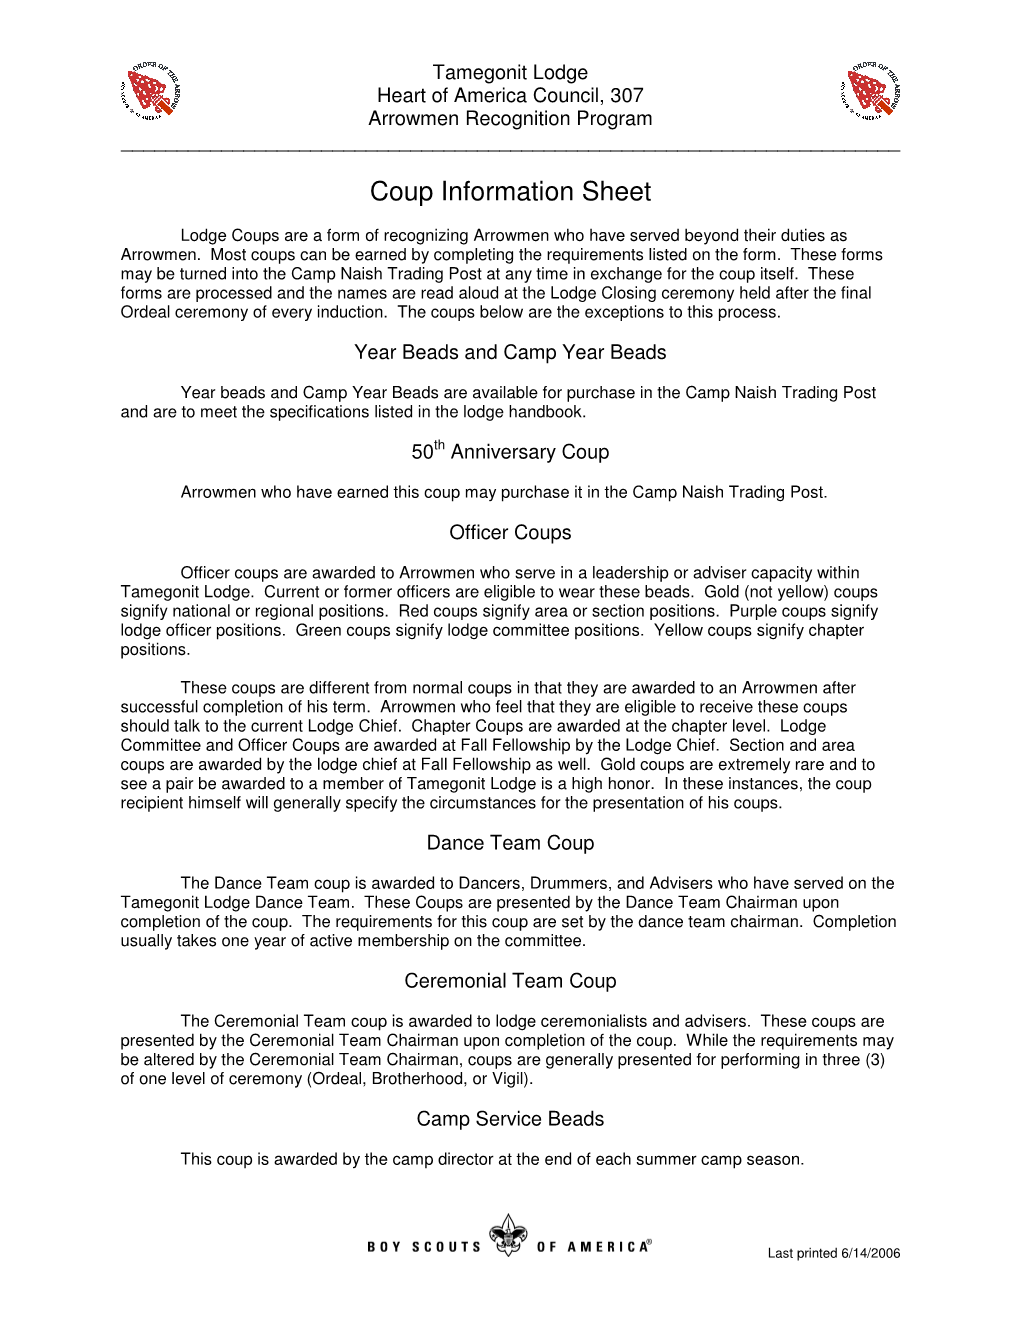 Coup Information Sheet